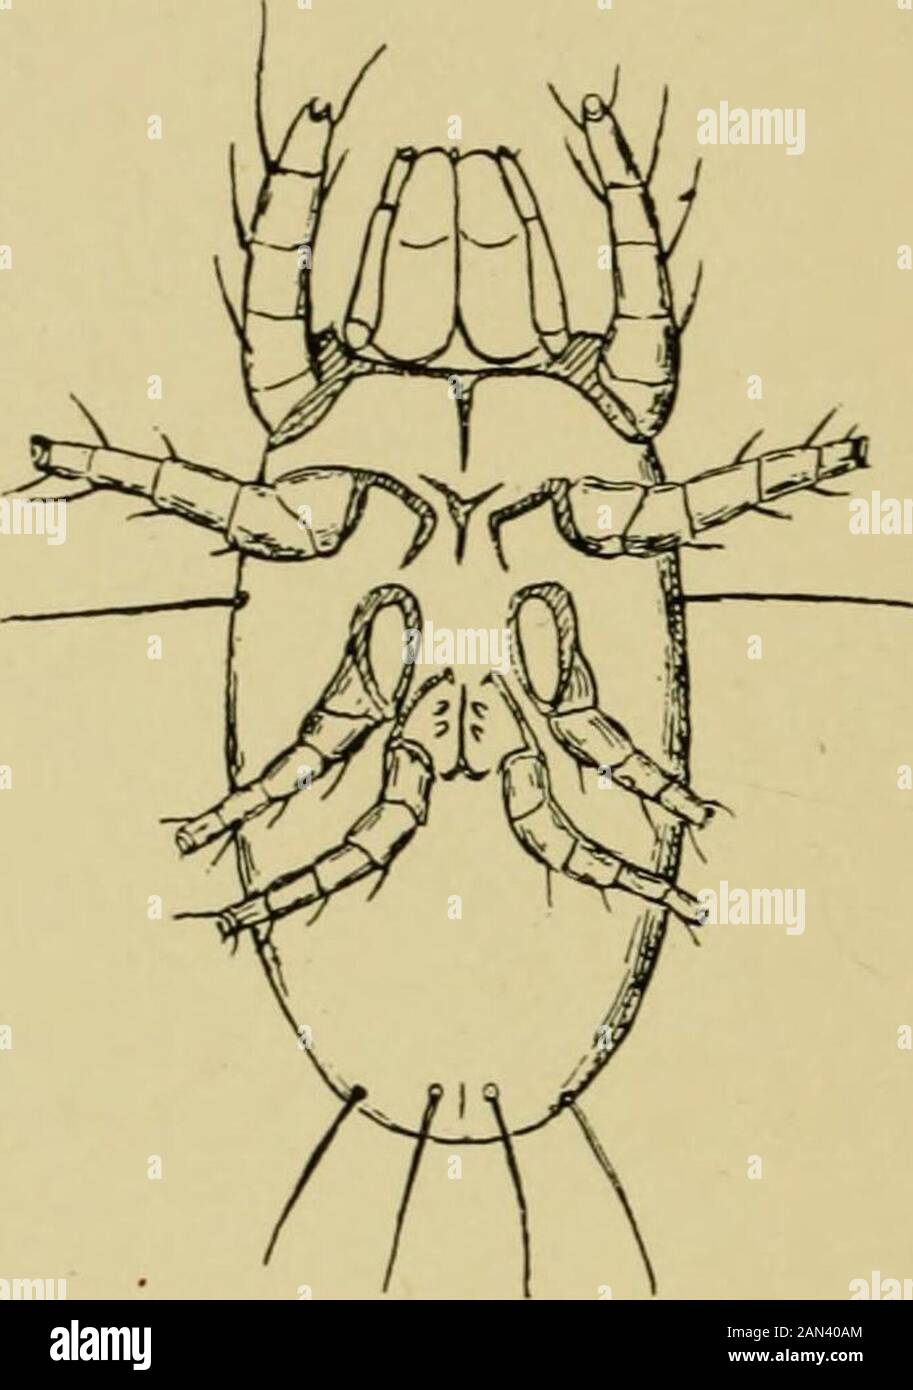 Handbook of medical entomology . 152. Monieziella (Histiogaster) emtomophaga-spermatica, ventral aspect,male and female. After Trouessart, ii. Very short palpi, ridged dorsally and laterally; slightlychitinized; unfed adults of smaller size; coxae I bifid;male with adanal and accessor} adanal shields (fig. 139). B, annulatus Boophilus Curtis ff. Palpi longer than broad (fig. 157). g. Male with pair of adanal shields, and two posterior abdominalprotrusions capped by chitinized points; festoons present orabsent. Several species, among them H. aegypticum (fig. 140) from the old world Hyalomma Koc Stock Photo